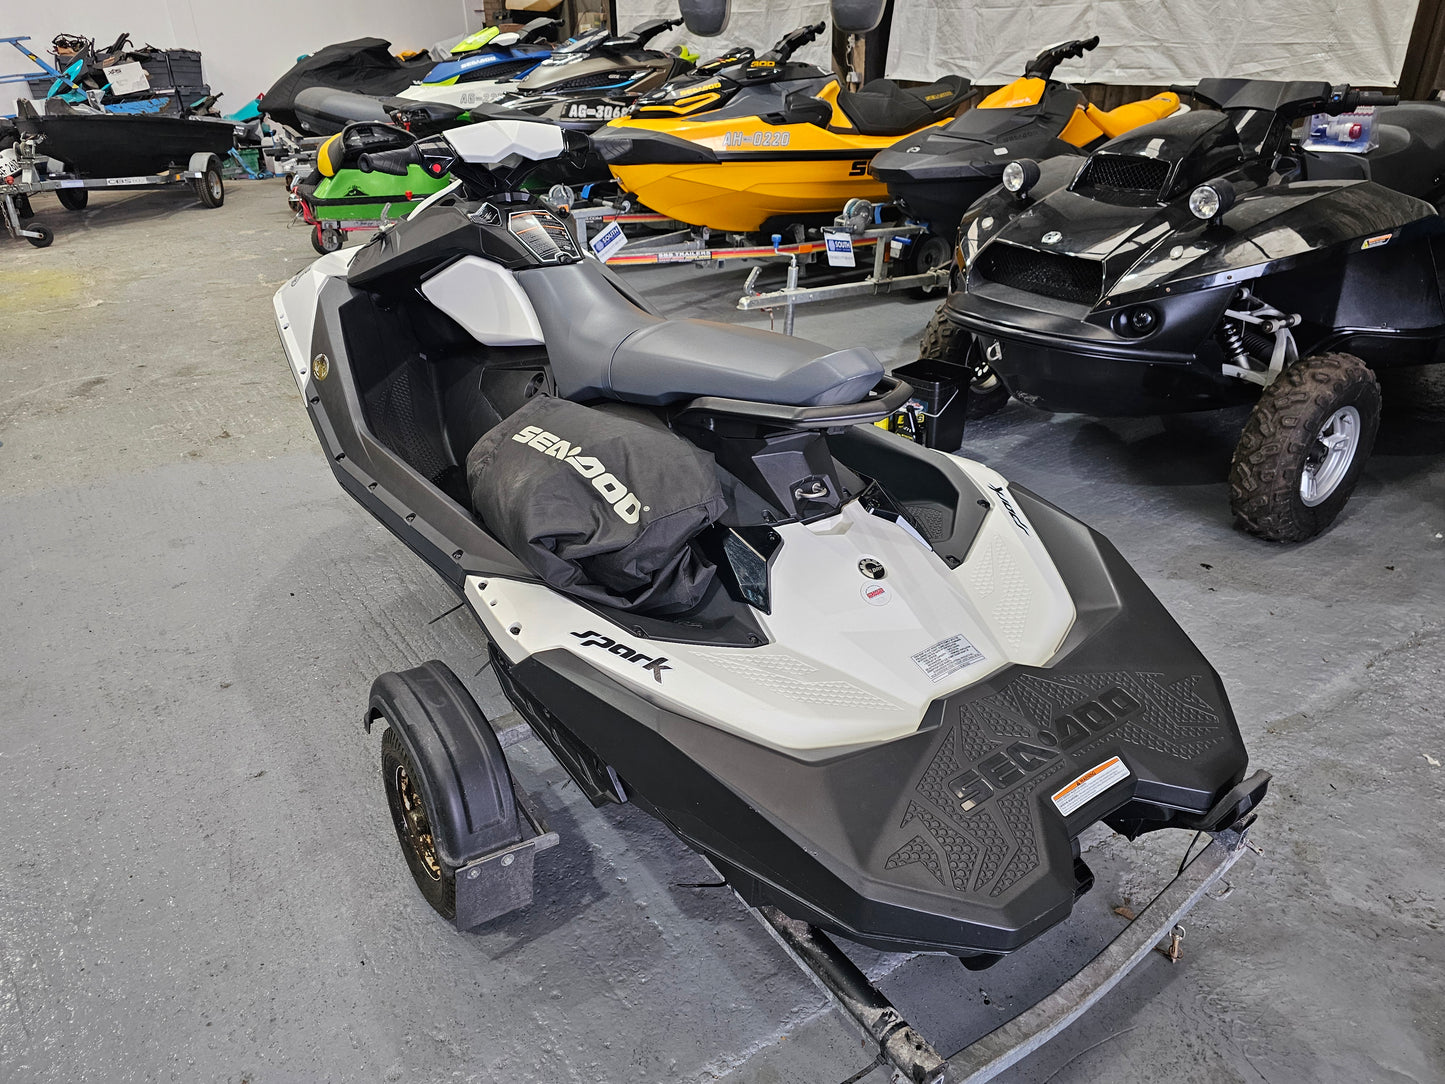 2016 Pre-owned Sea-Doo Spark 3UP IBR 90hp